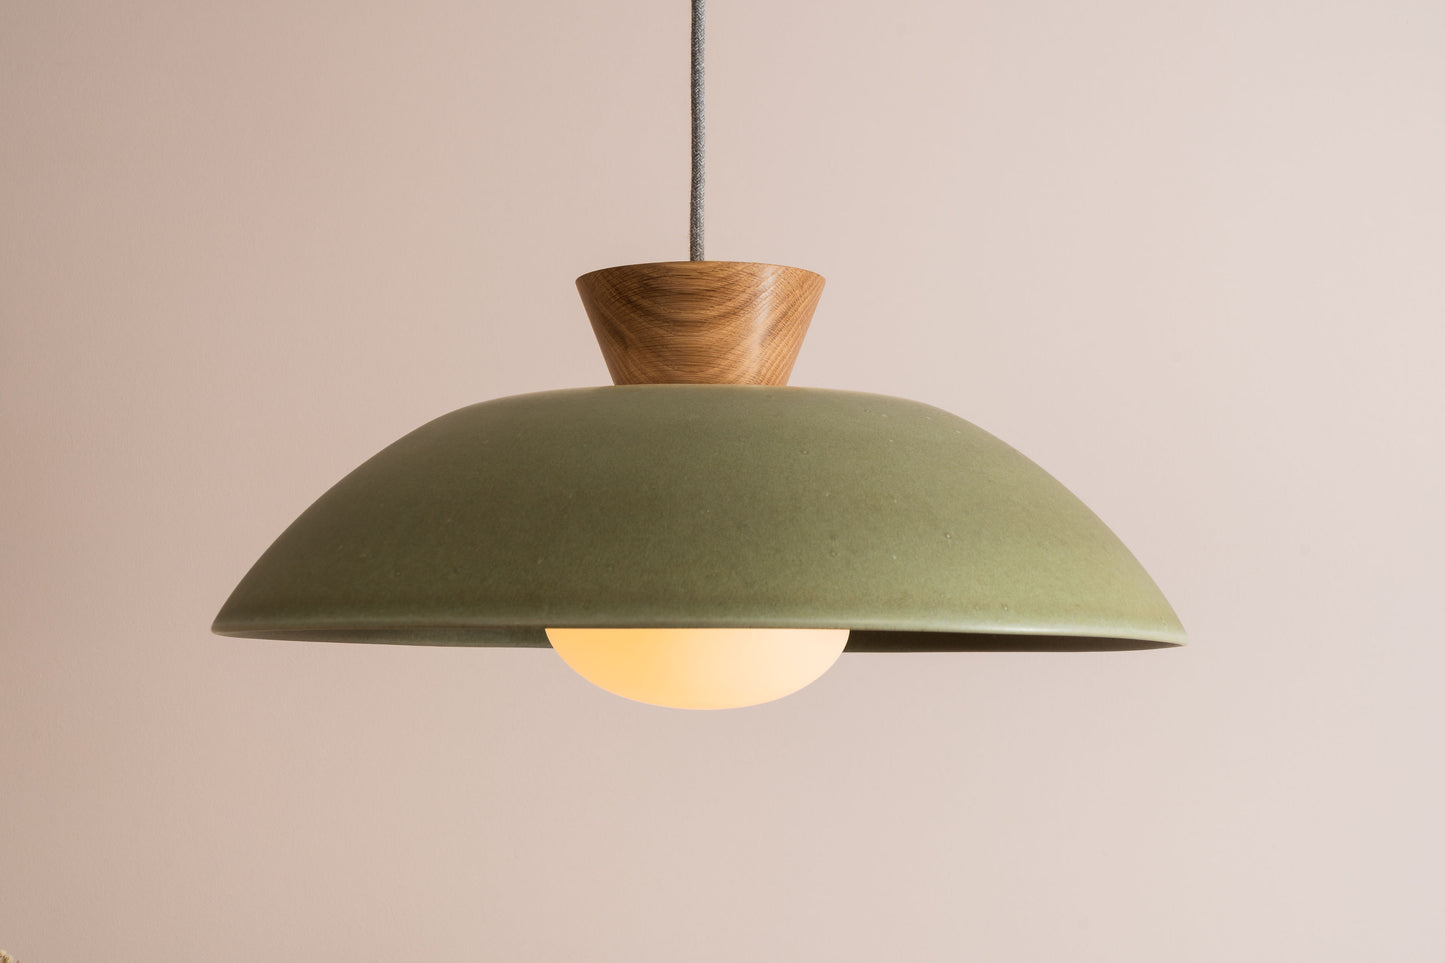 XL Dawn Pendant Light in Ceramic and Oak [OUTLET]